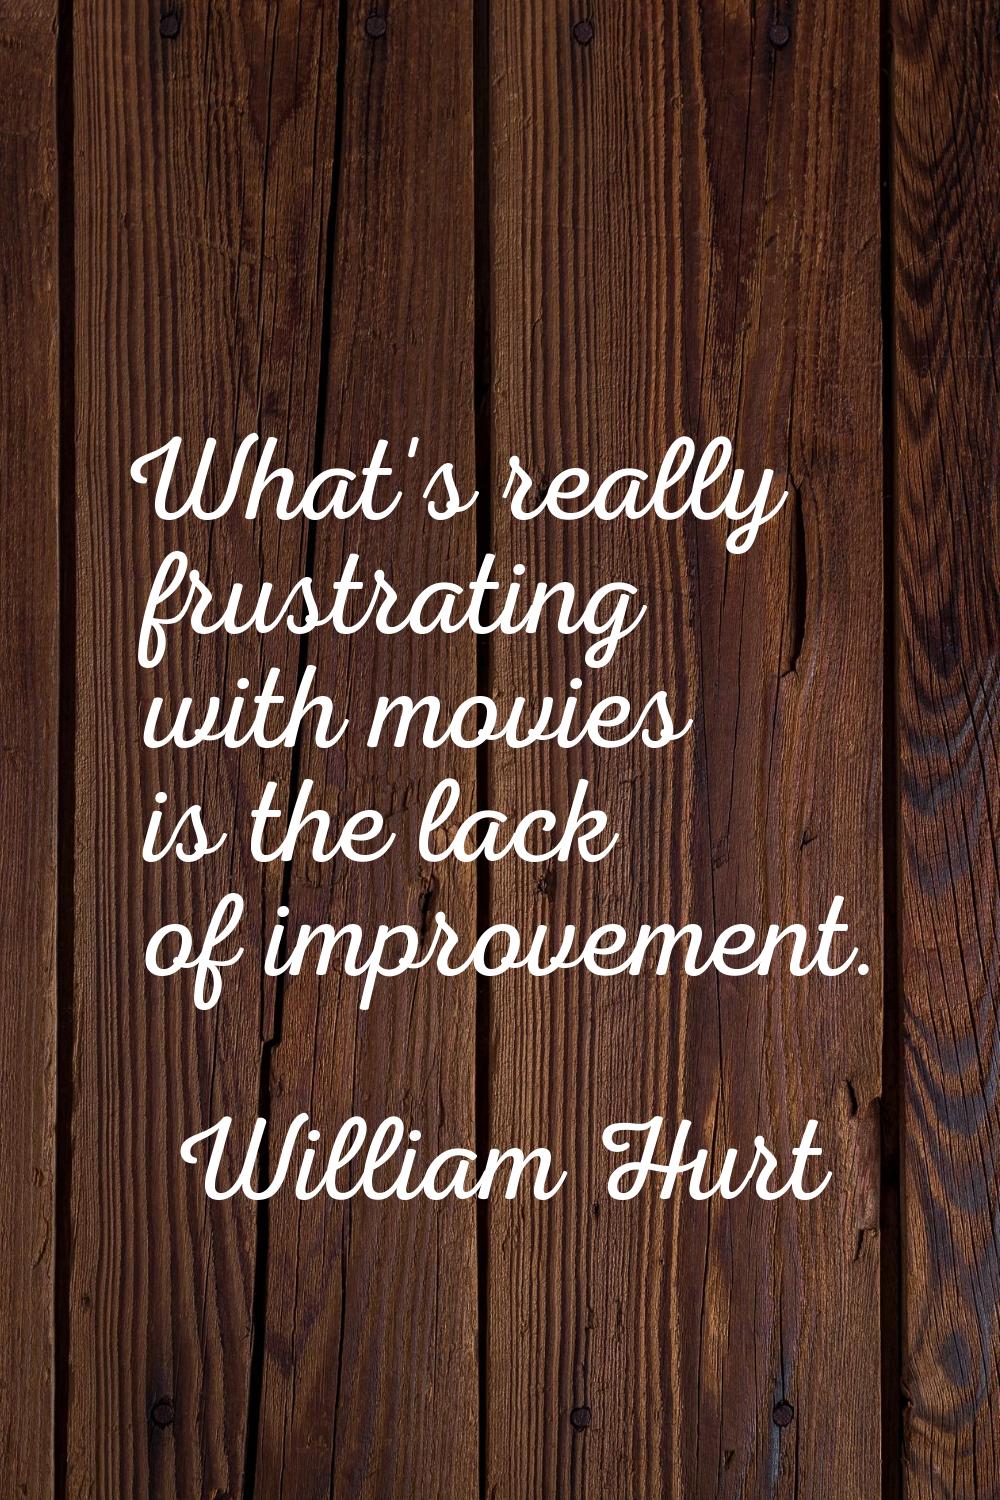 What's really frustrating with movies is the lack of improvement.